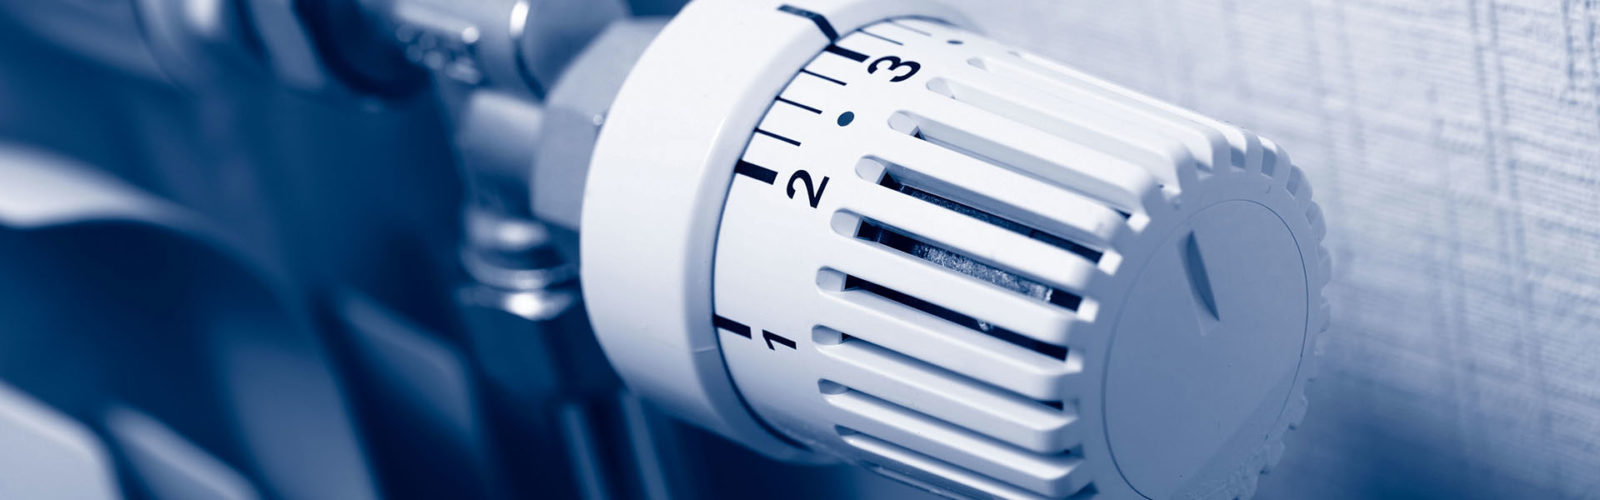 Heating Services, Repairs, Installations & Maintenance